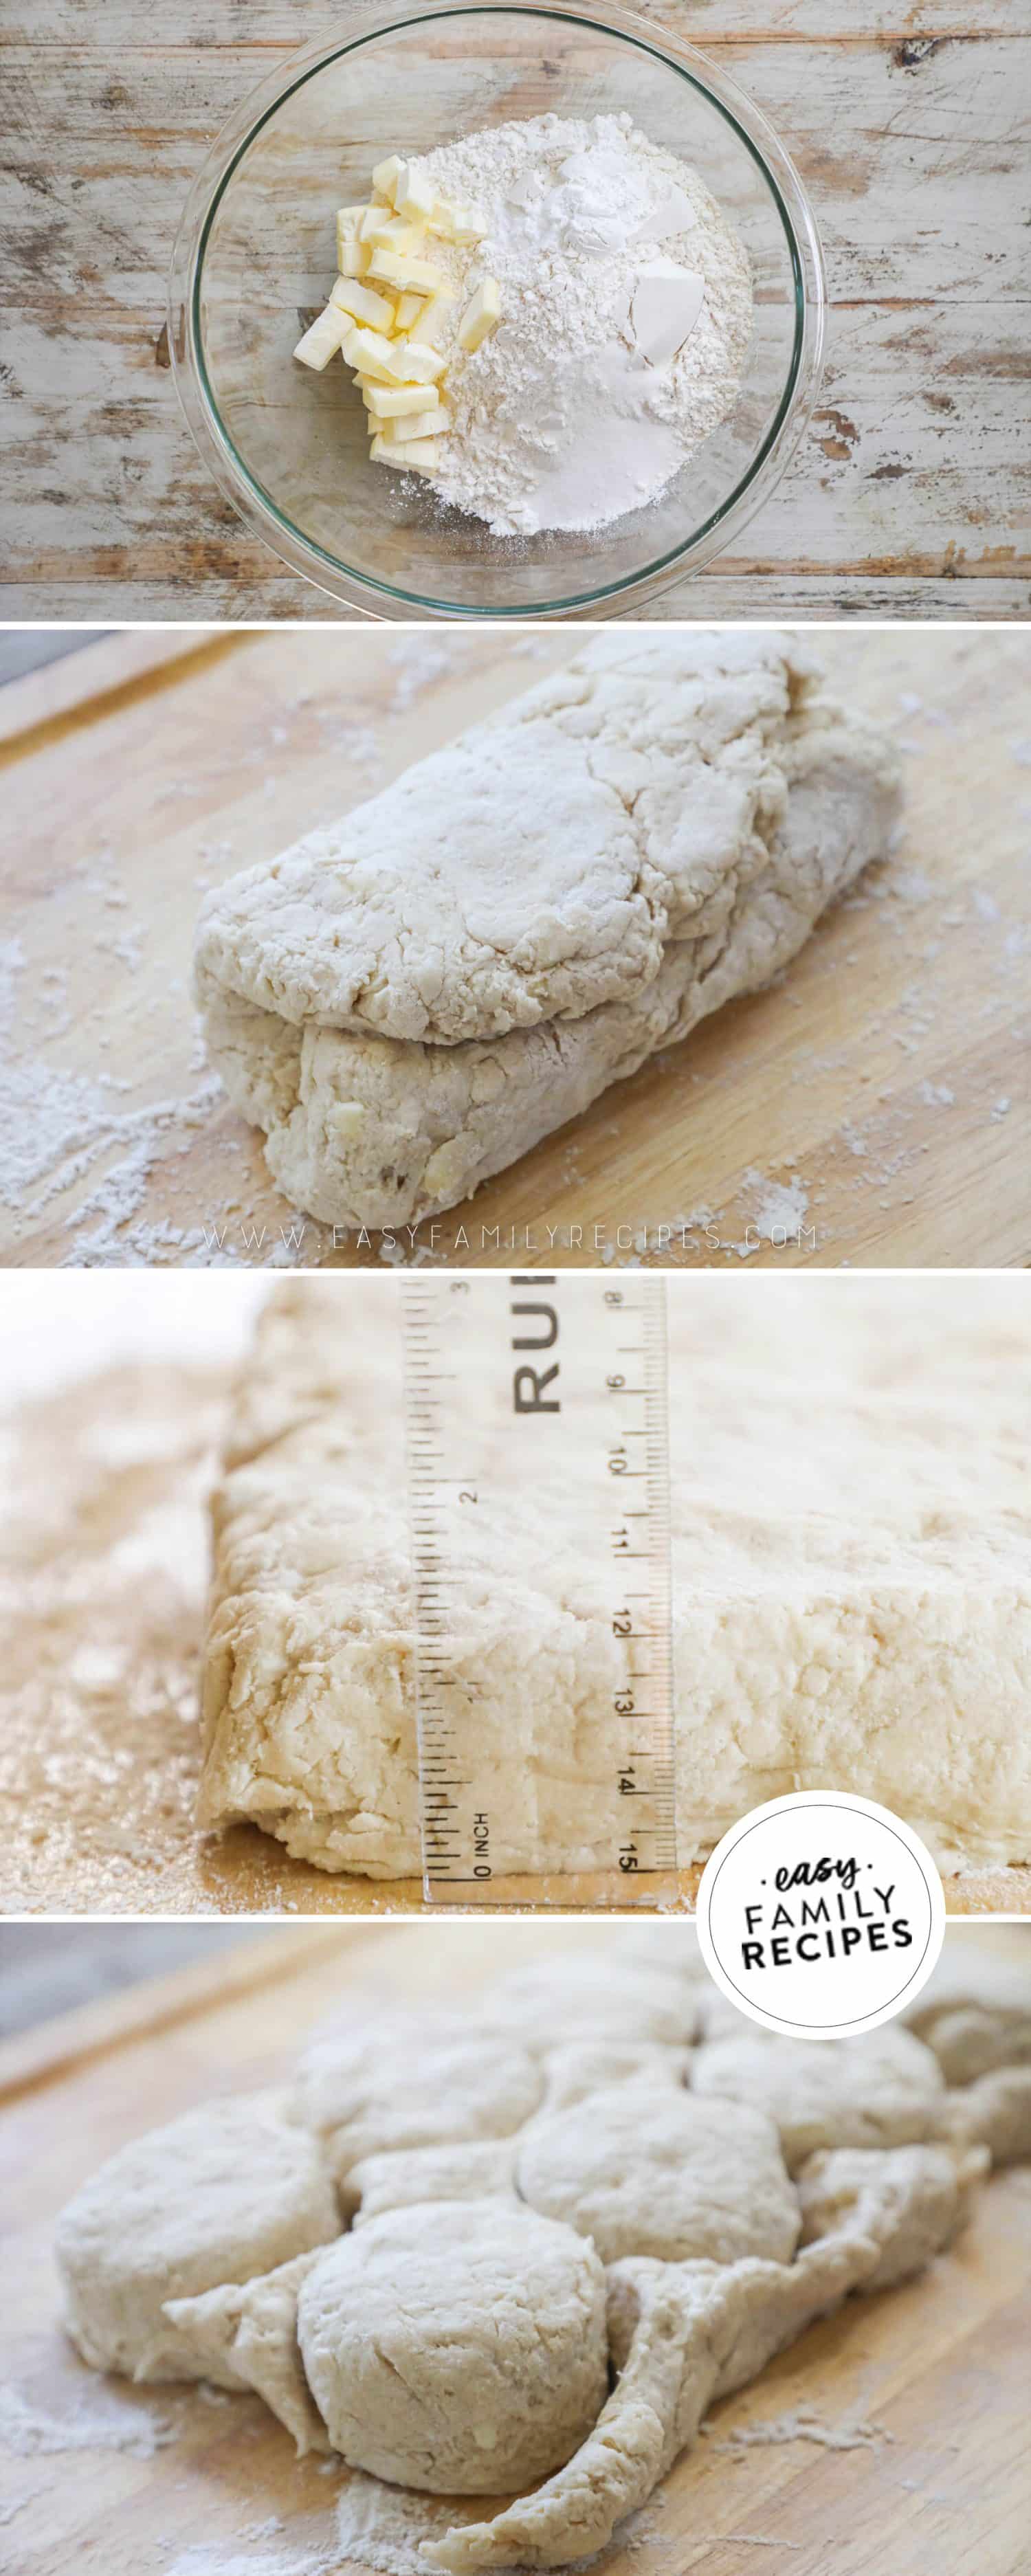 4 image collage making tall buttermilk biscuits: 1- cold butter and flour in bowl, 2- dough pressed and folded into thirds, 3- a ruler showing the dough is about an inch high, 4- biscuit dough cut into circles.